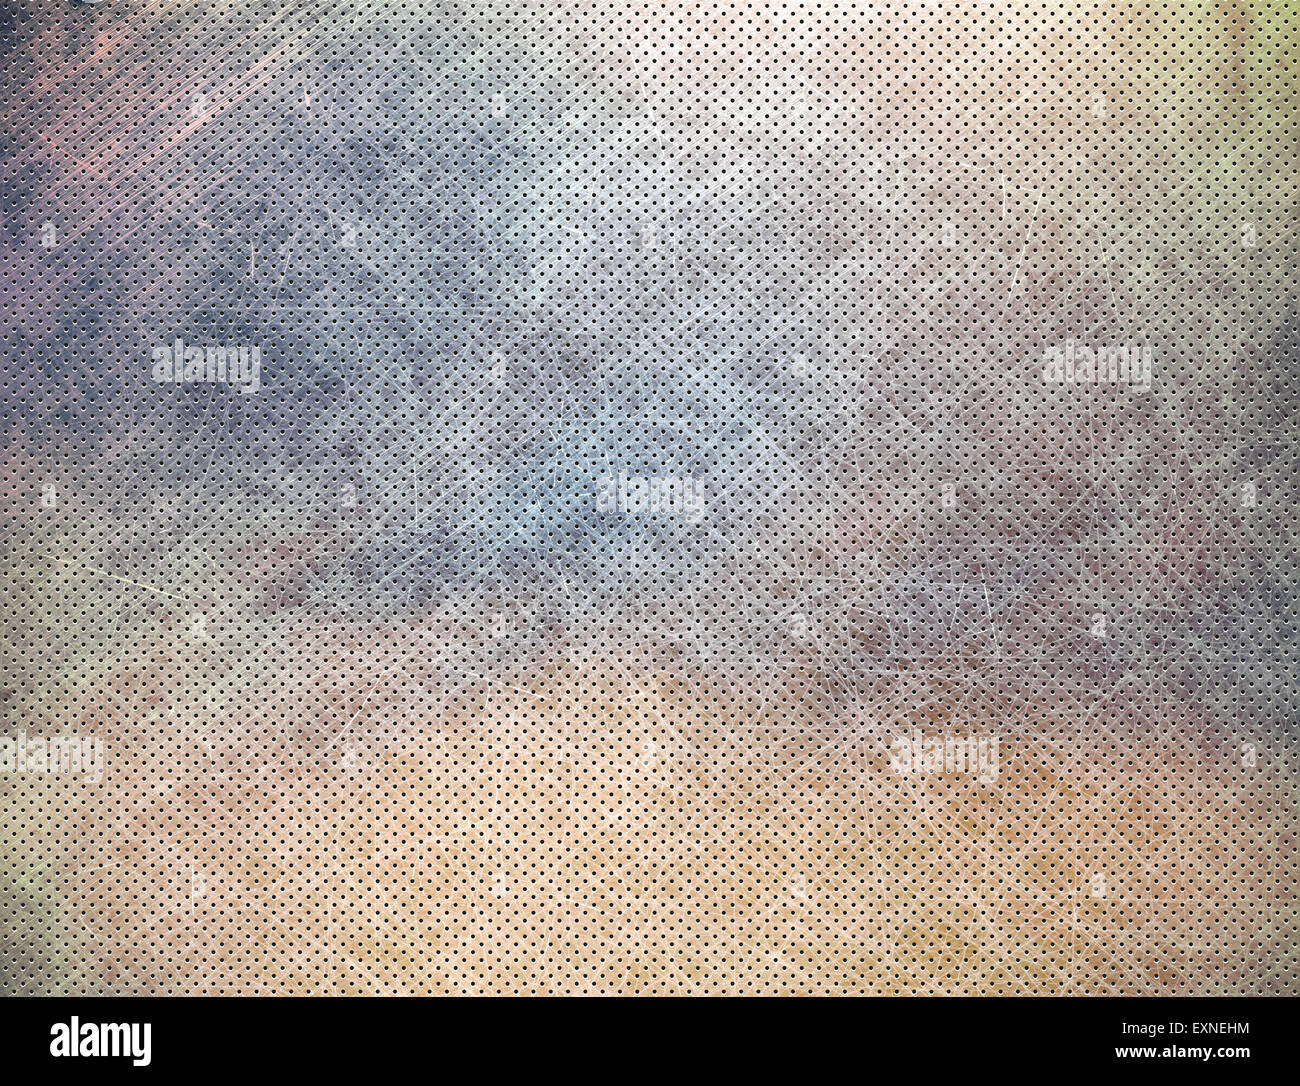 Perforated grunge texture background, scratched and rusty Stock Photo